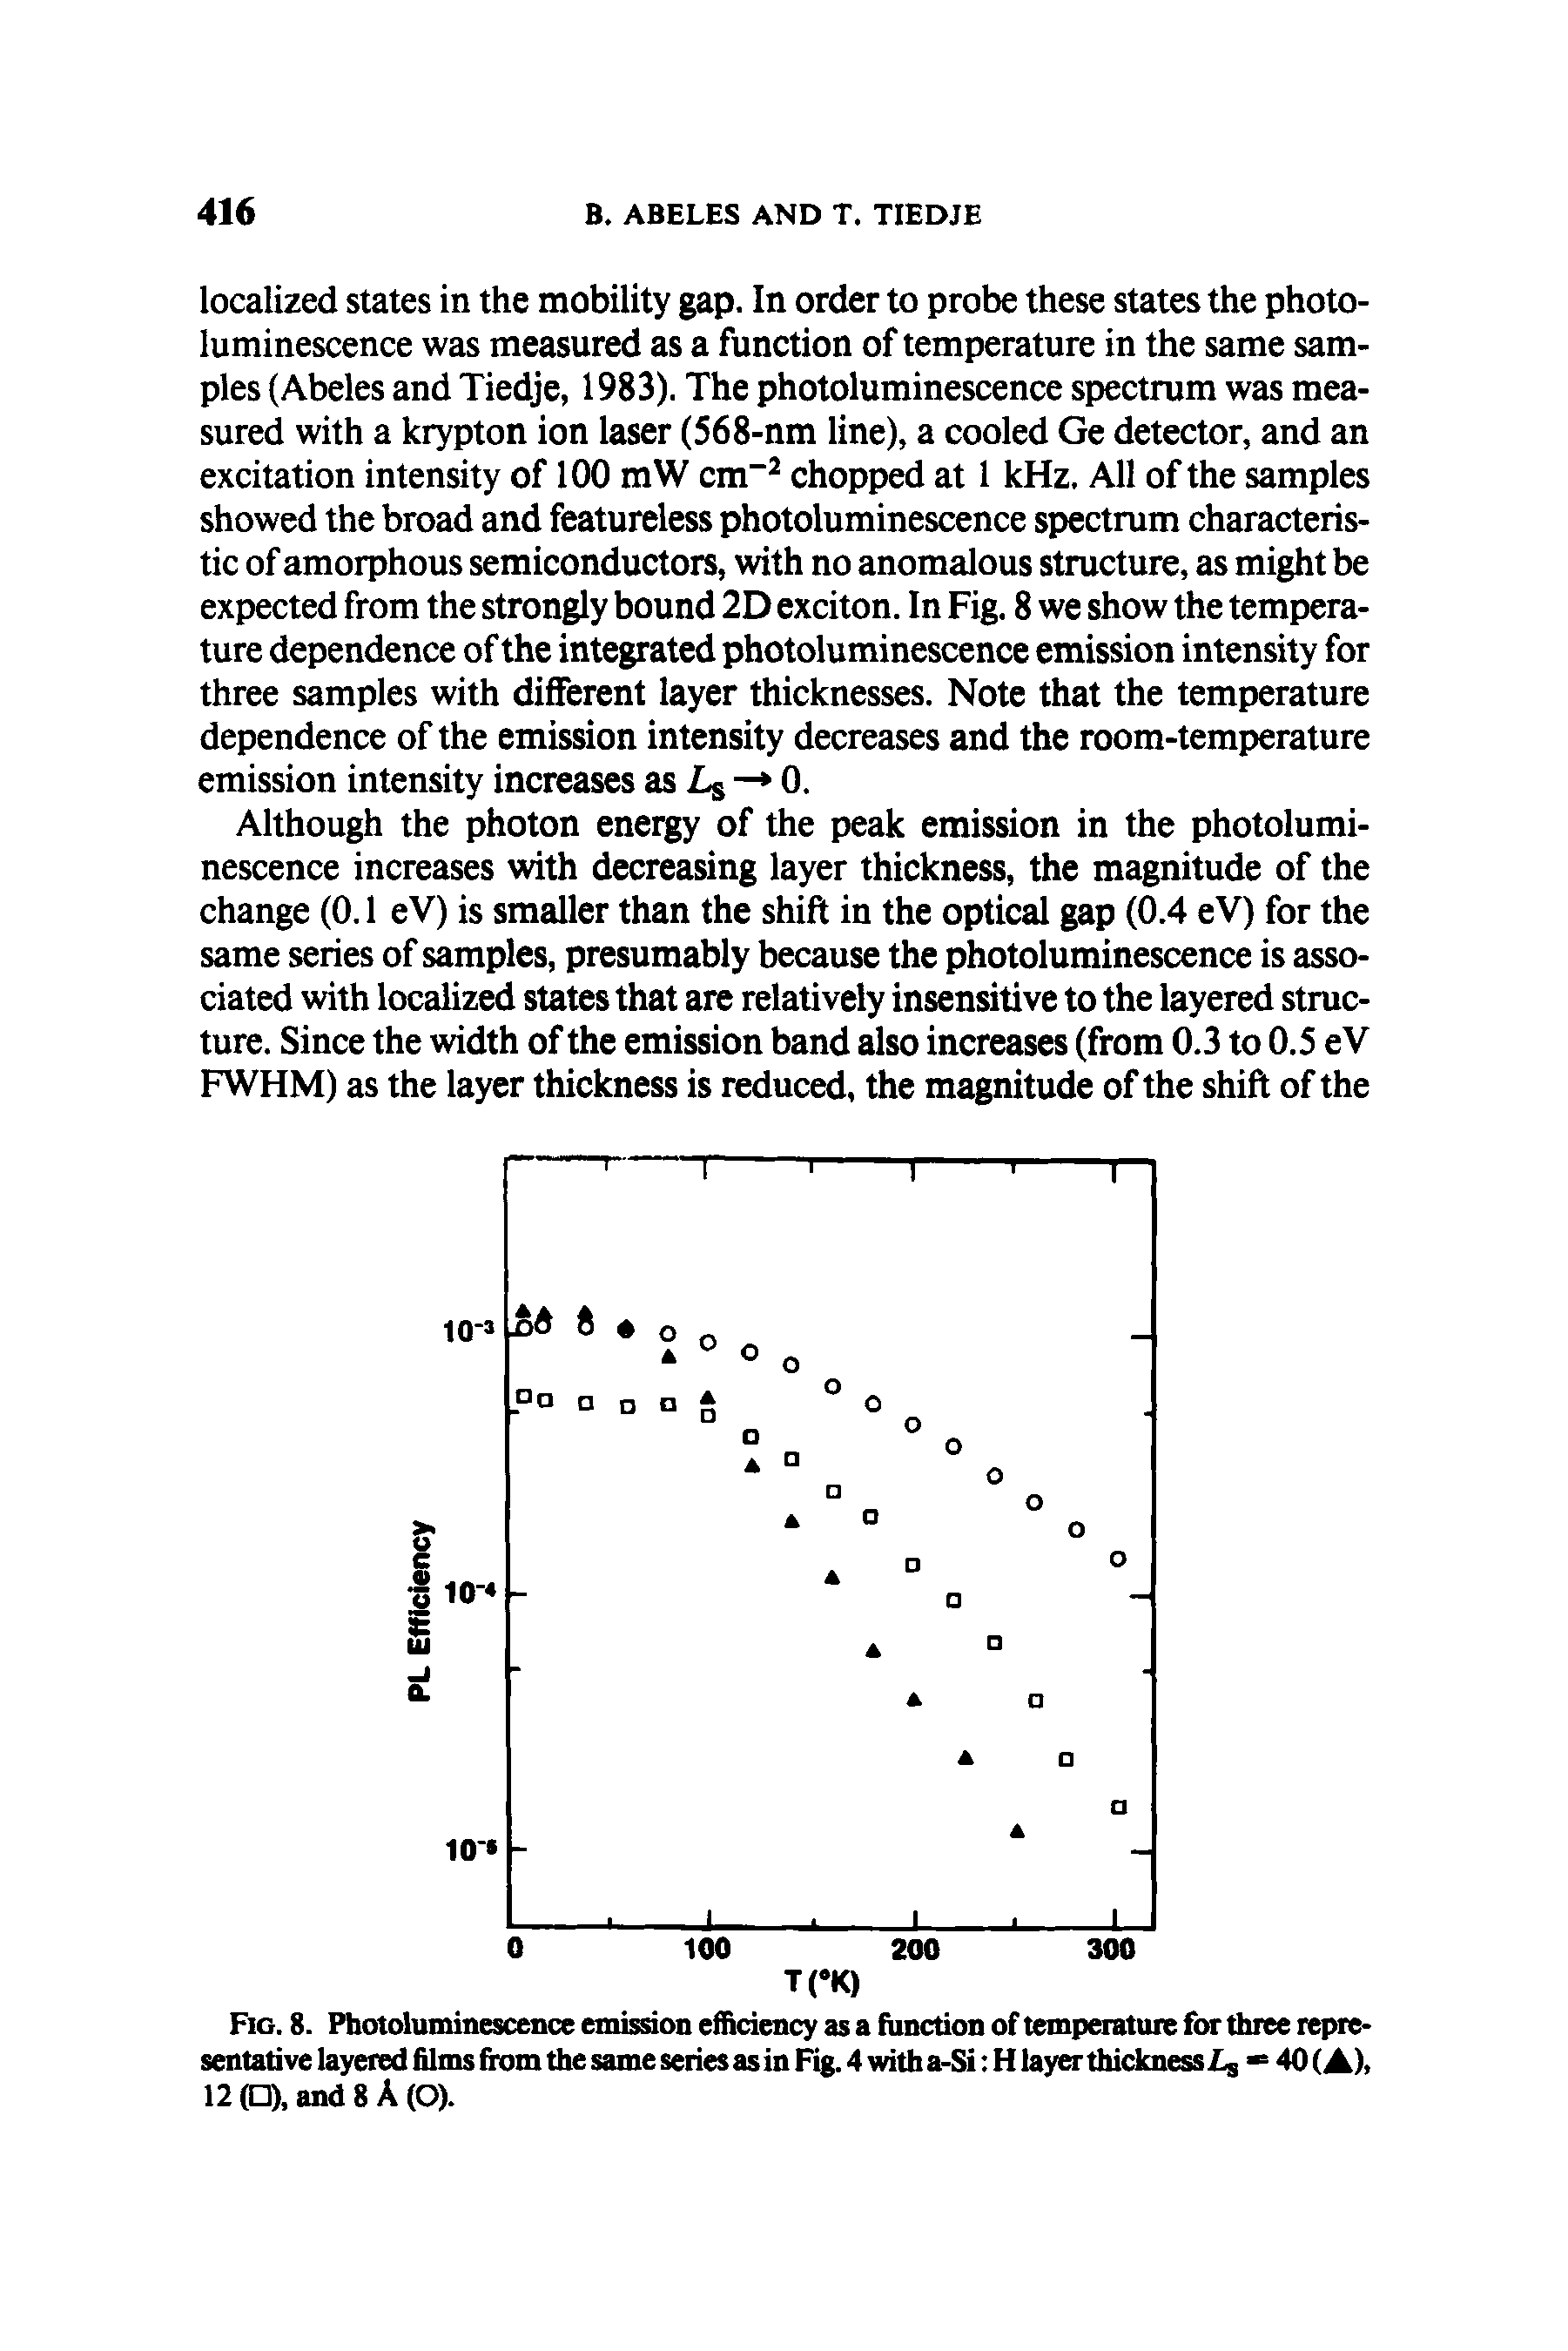 Fig. 8. Photoluminescence emission efficiency as a function of temperature for three representative layered films from the same series as in Fig. 4 with a-Si H layer thickness L, 40(A). 12 ( ), and 8 A (O).